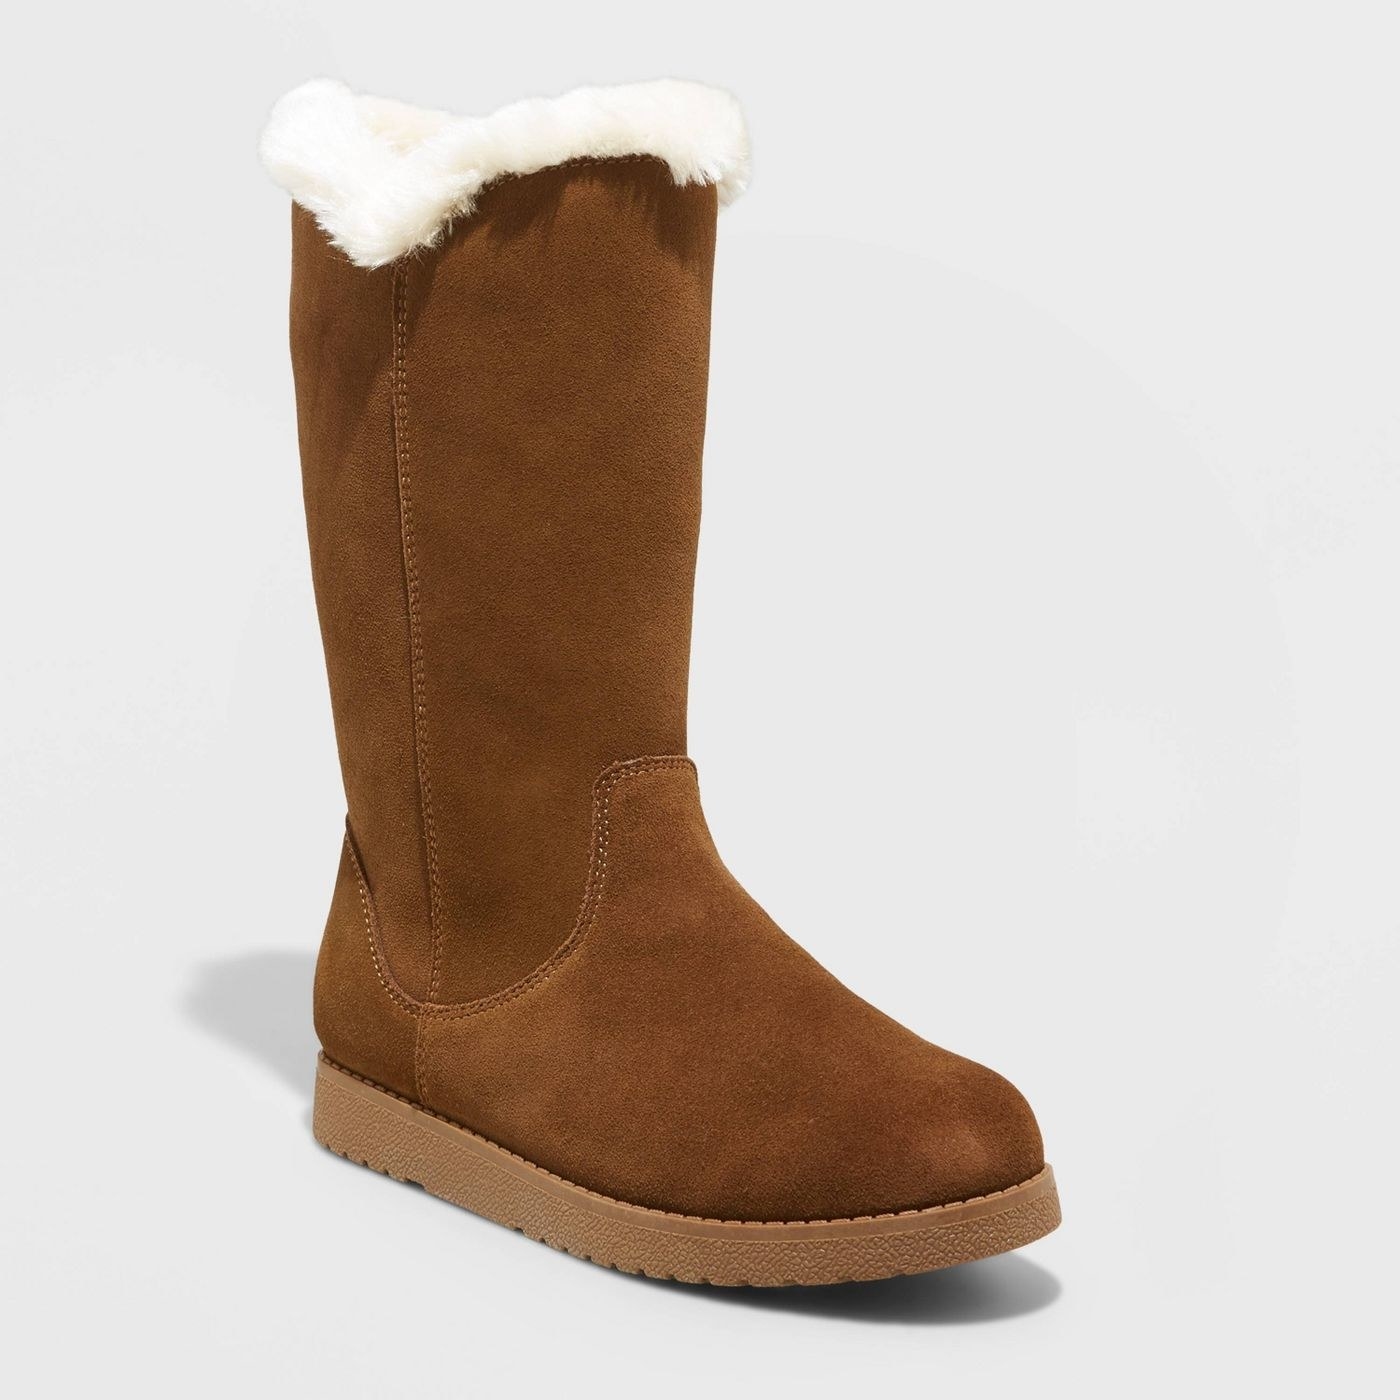 tall brown suede boot with shearling lining